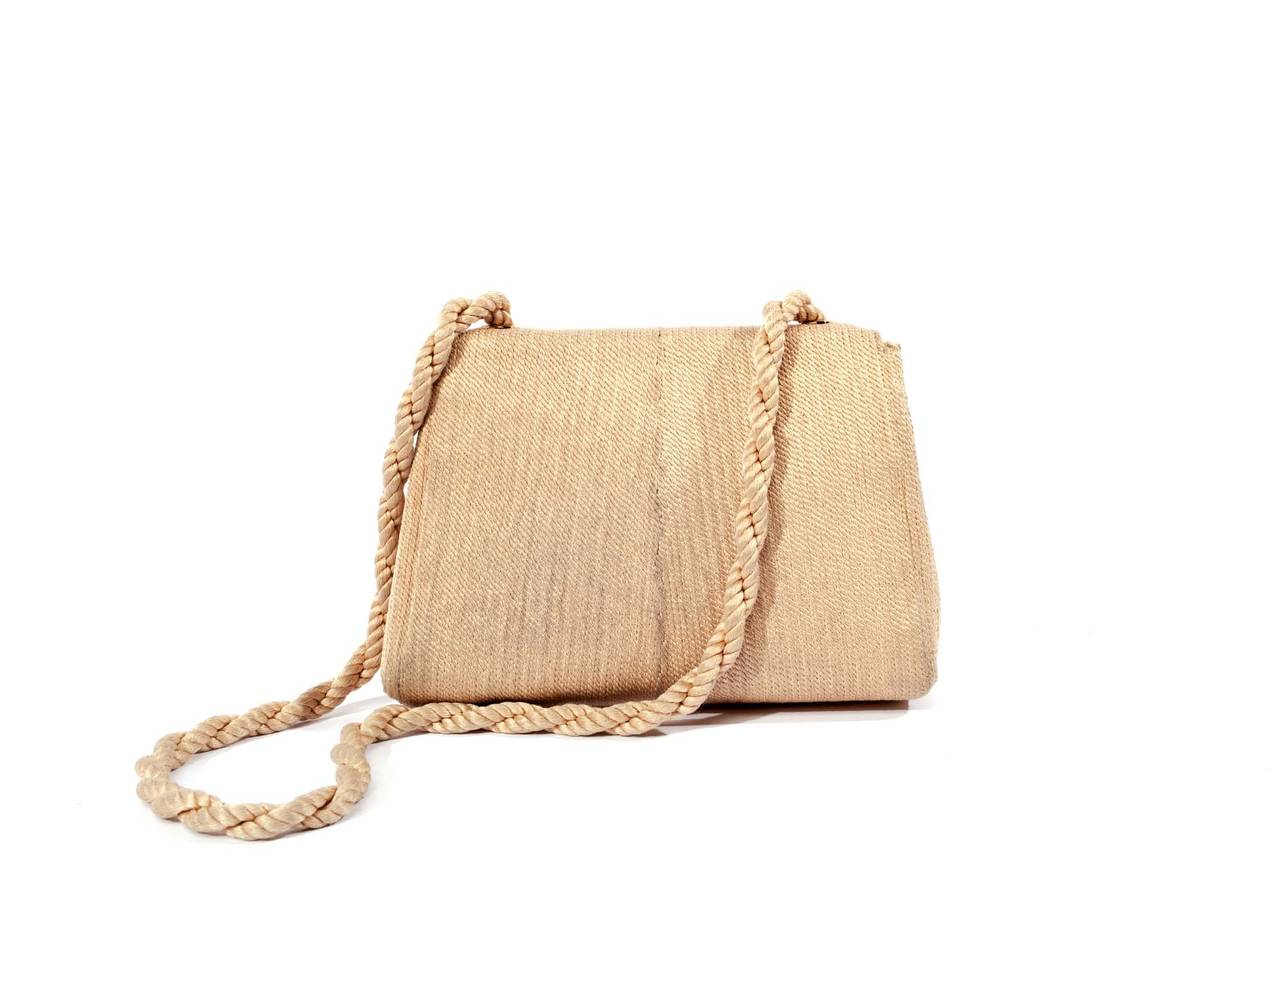 Women's Chanel Vintage beige rope purse with gold logo double CC closure